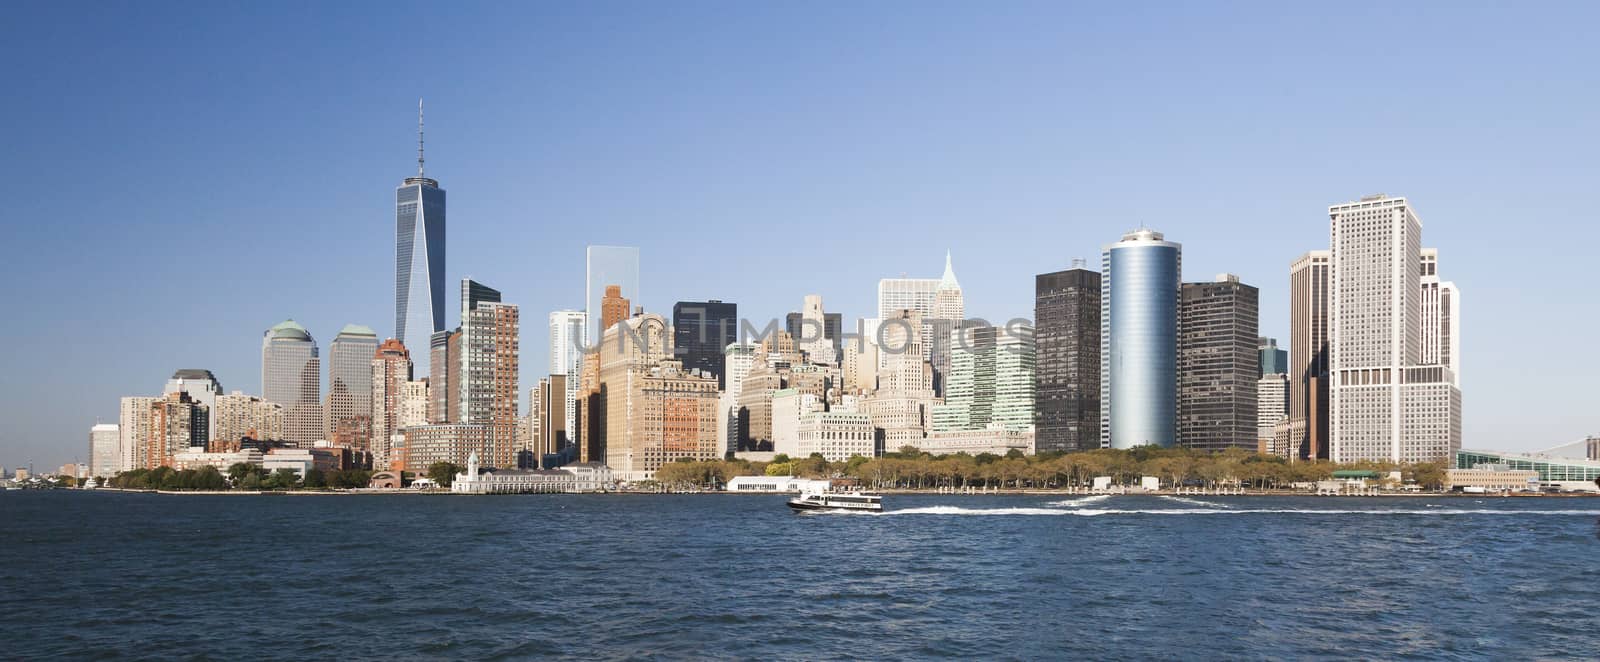 The New York City skyline at afternoon with the Financial district